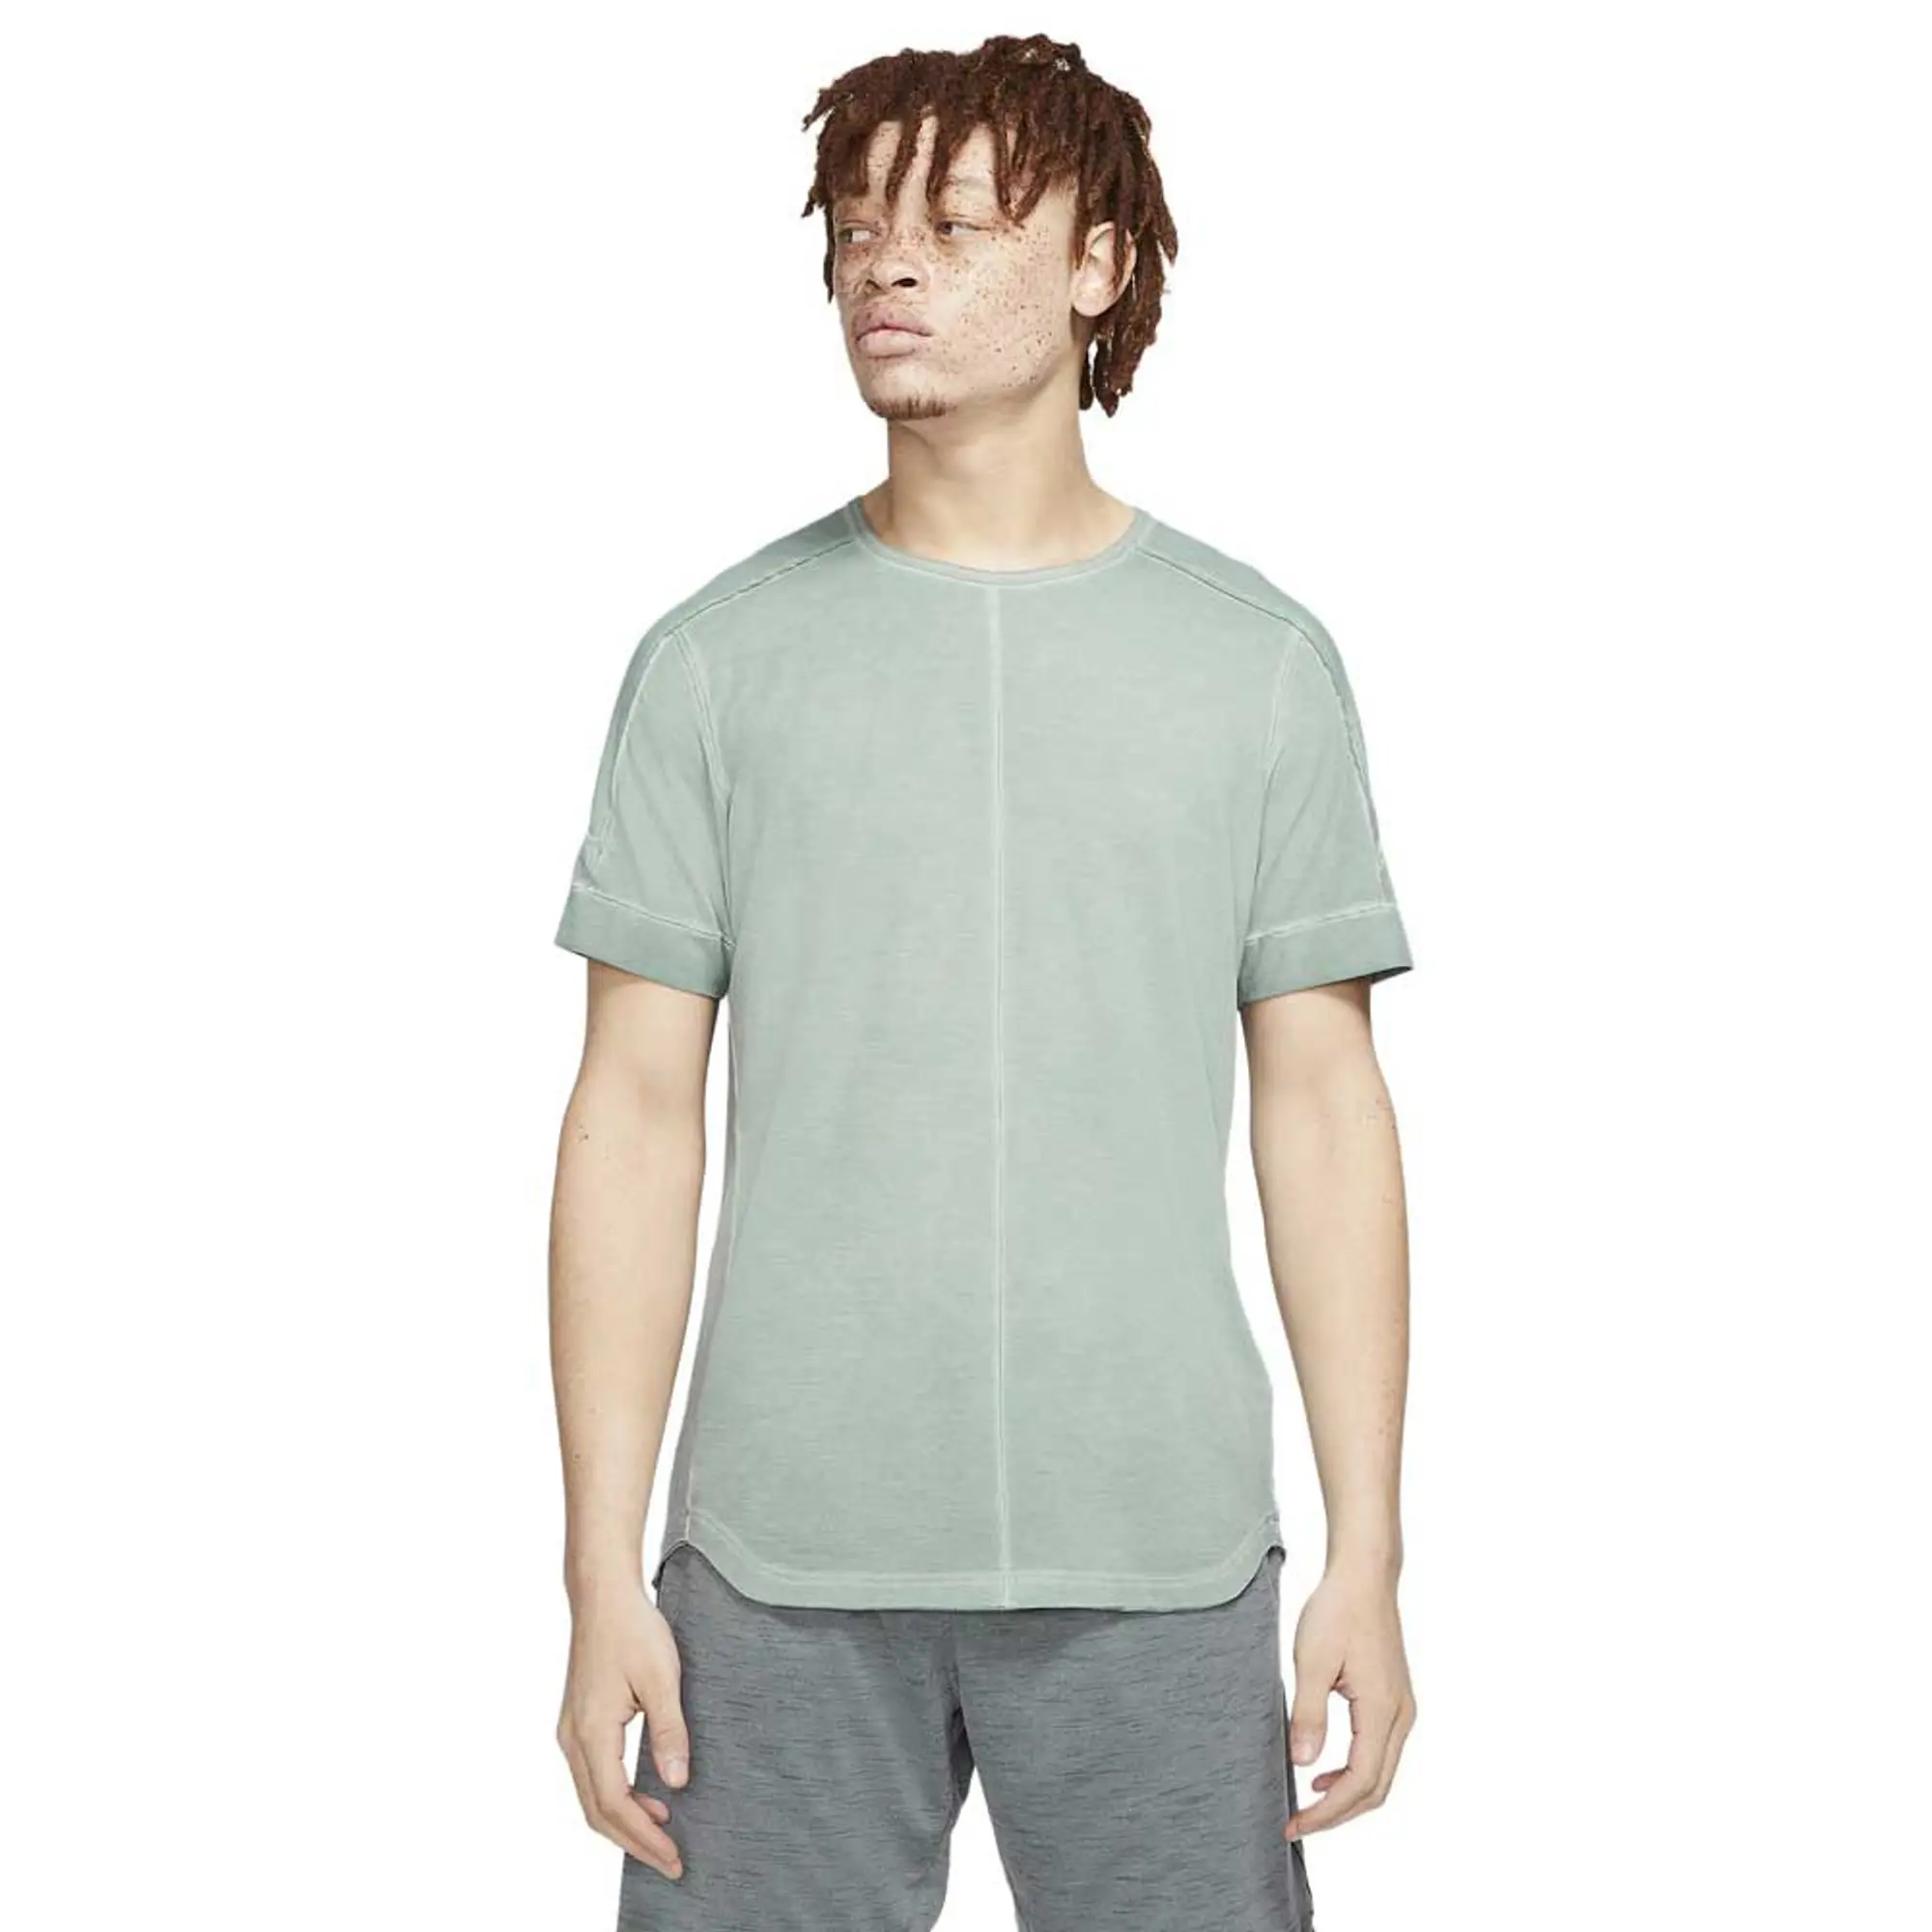 Nike Yoga Specialty Dyed Short Sleeve T-shirt, DC6723-337